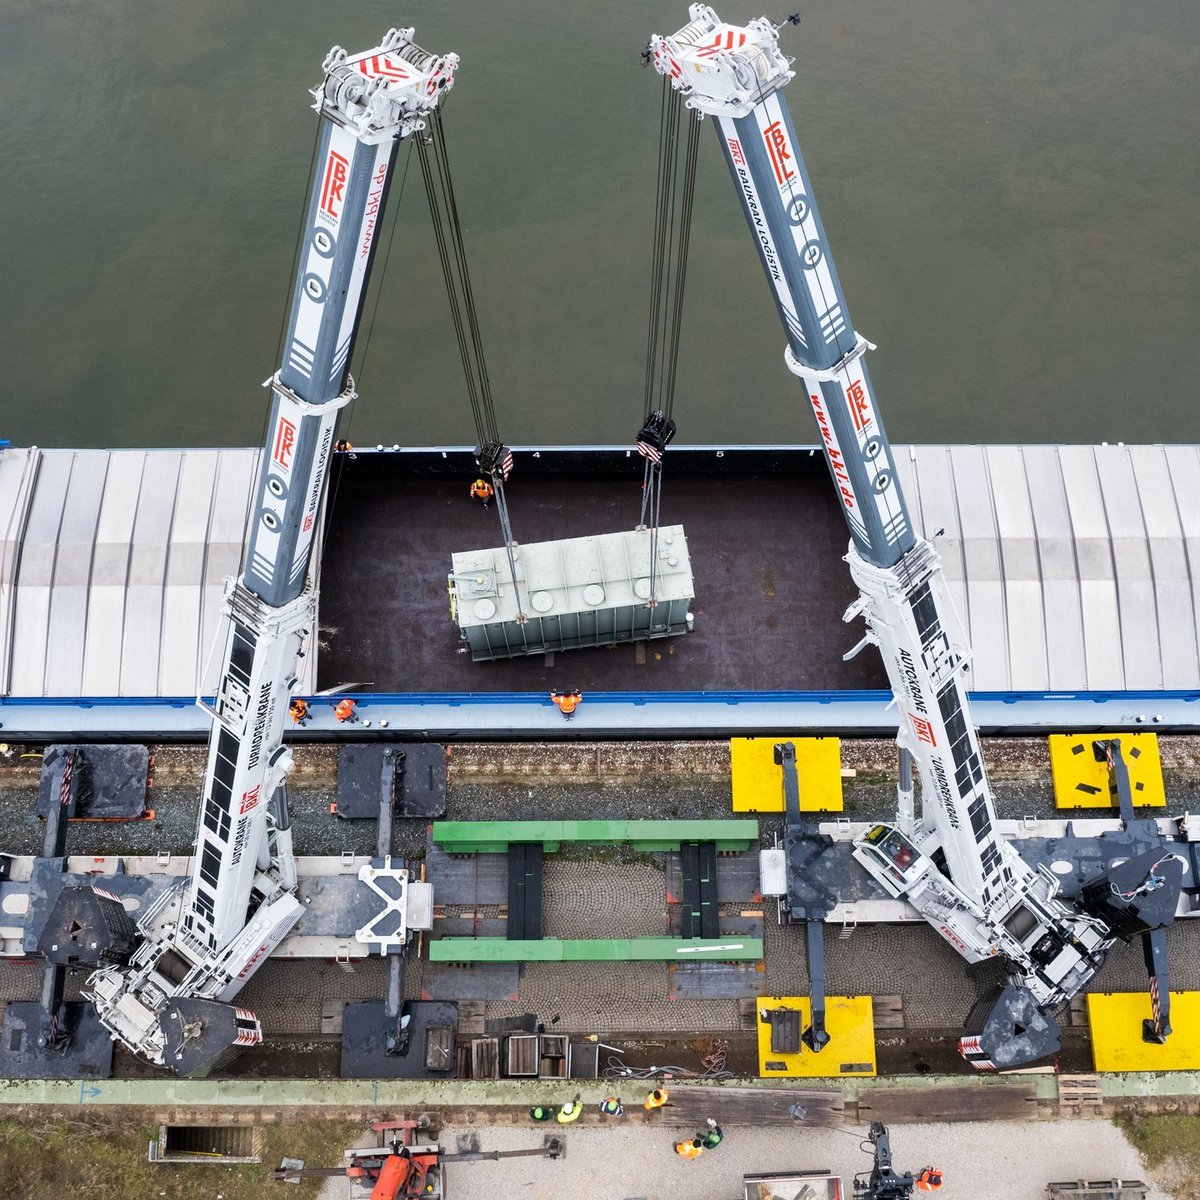 It takes a pair of expert crane operators to pull off a tandem lift like this! This crew is working together to offload this 150-tonne transformer from a barge. 📷 cranepedia #HeavyLifting #Cranes #WireRope #Rigging